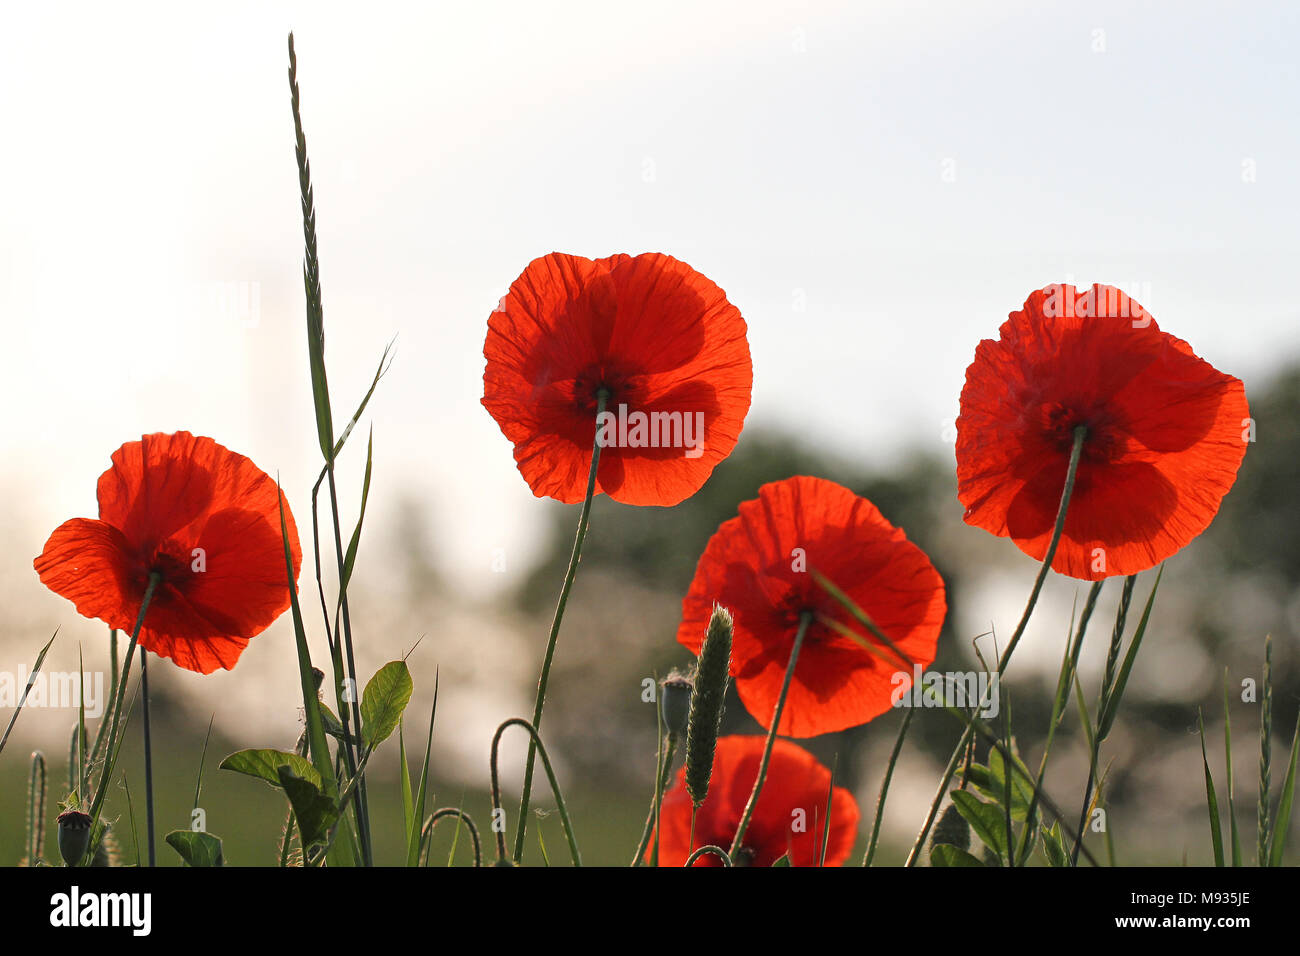 Poppy flowers or papaver dubium poppies with the light behind remembrance flower first world war remembering Flanders fields poem by John McCrae Stock Photo